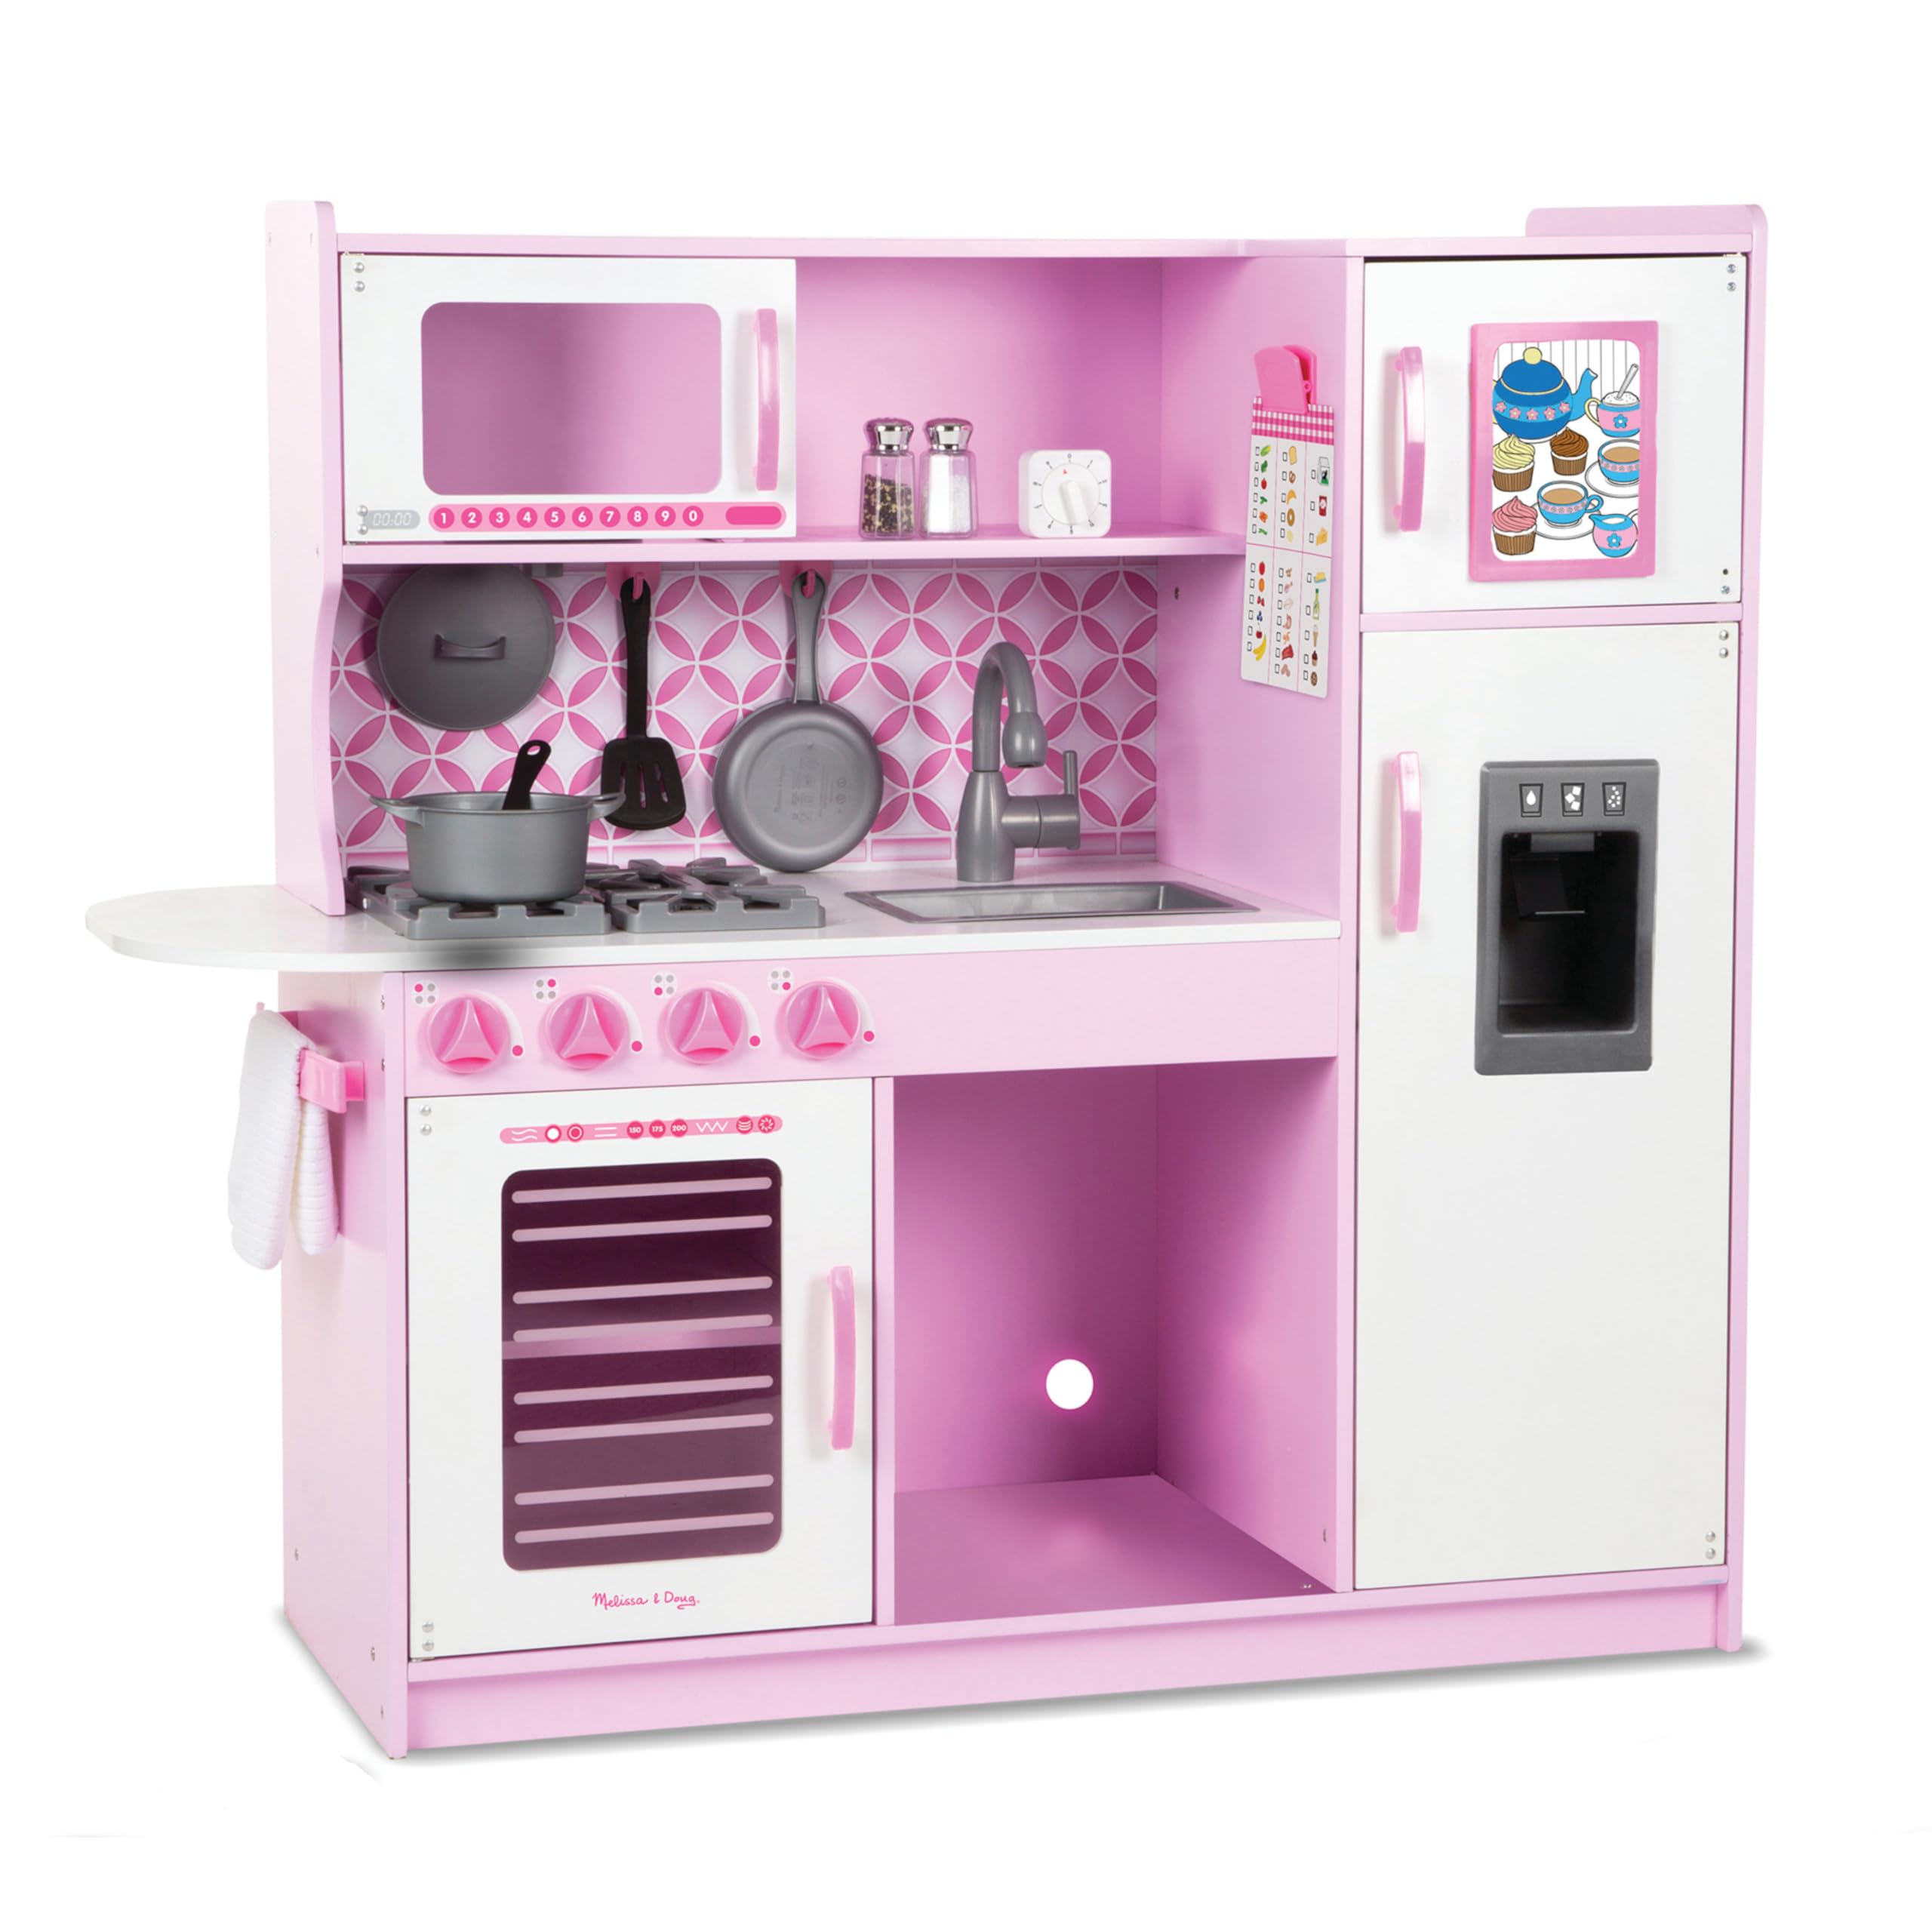 Melissa & Doug Wooden Chef’s Pretend Play Toy Kitchen With “Ice” Cube Dispenser – Cupcake Pink/White, for 36 months to 84 months $115.99